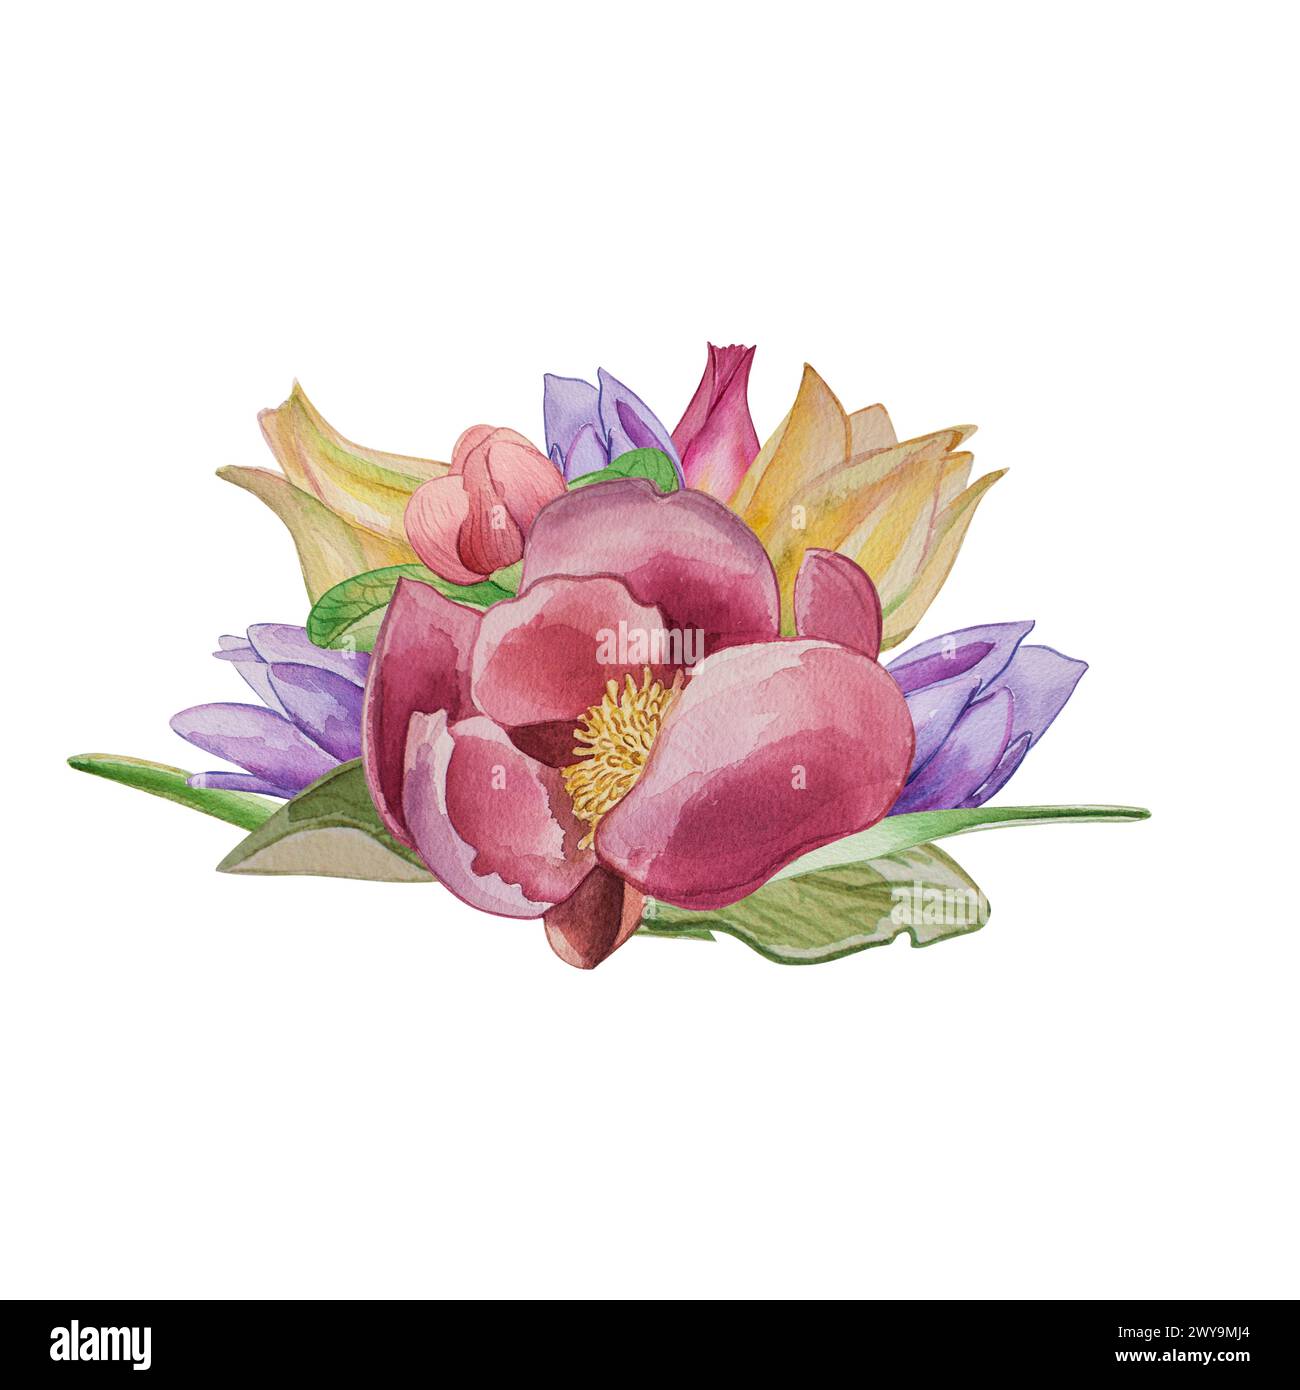 Pink peonies, yellow tulips, lilac primroses, spring flowers, petals and leaves are painted in watercolor on a white background.  For graphics design. Stock Photo